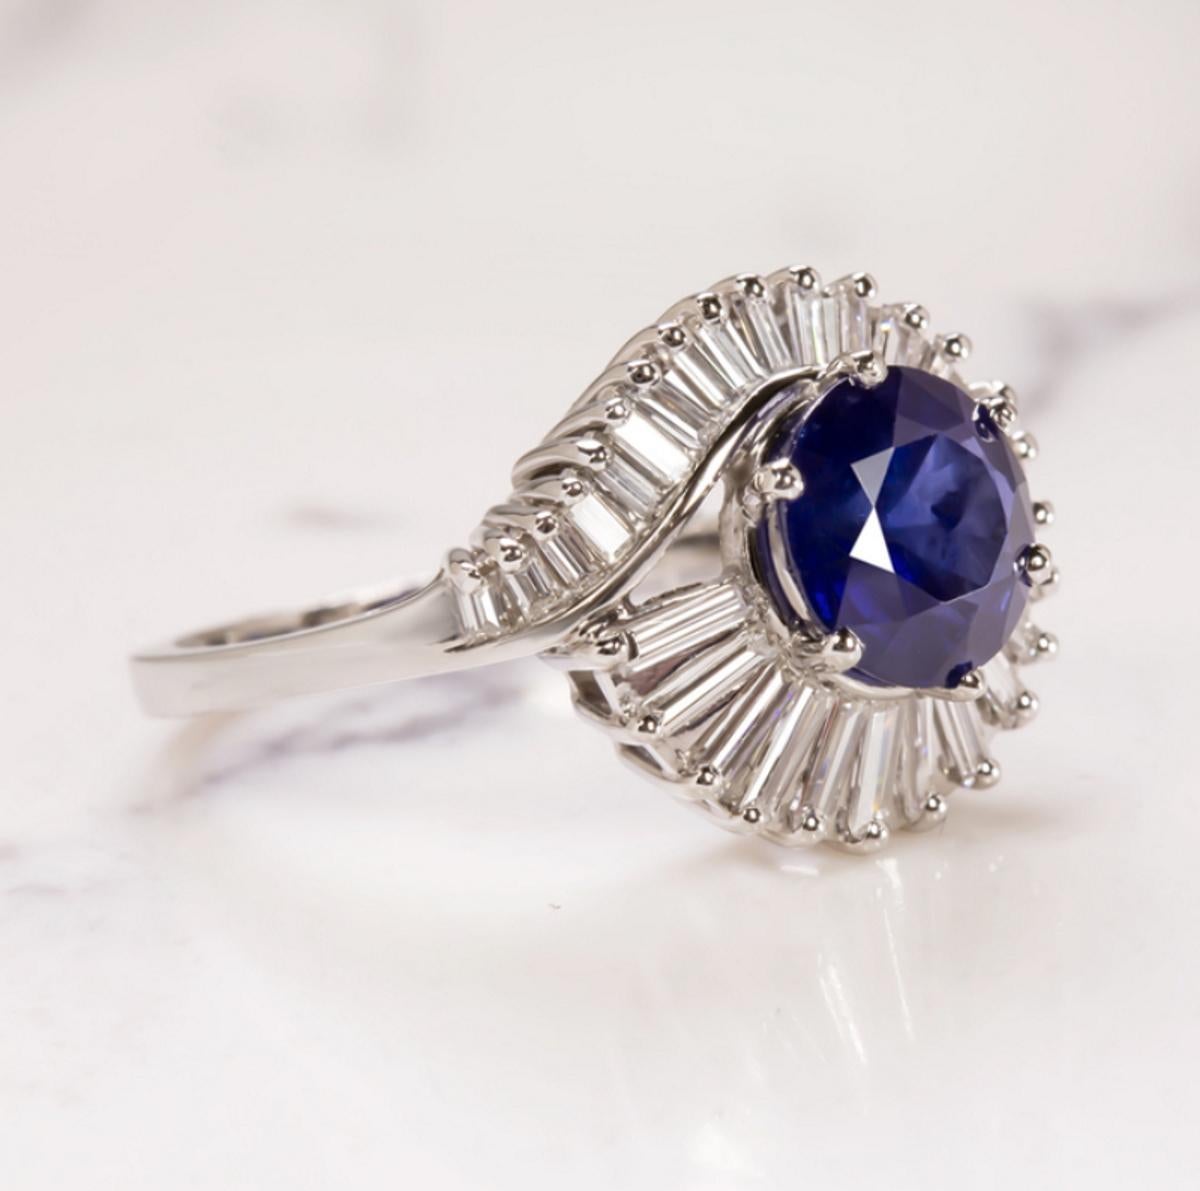 This eye-catching and high quality sapphire and diamond ring truly brings the glamour and the sparkle! The substantial 2.40ct round cut sapphire center is surrounded by a shimmering halo of high quality baguette cut diamonds. The sapphire has